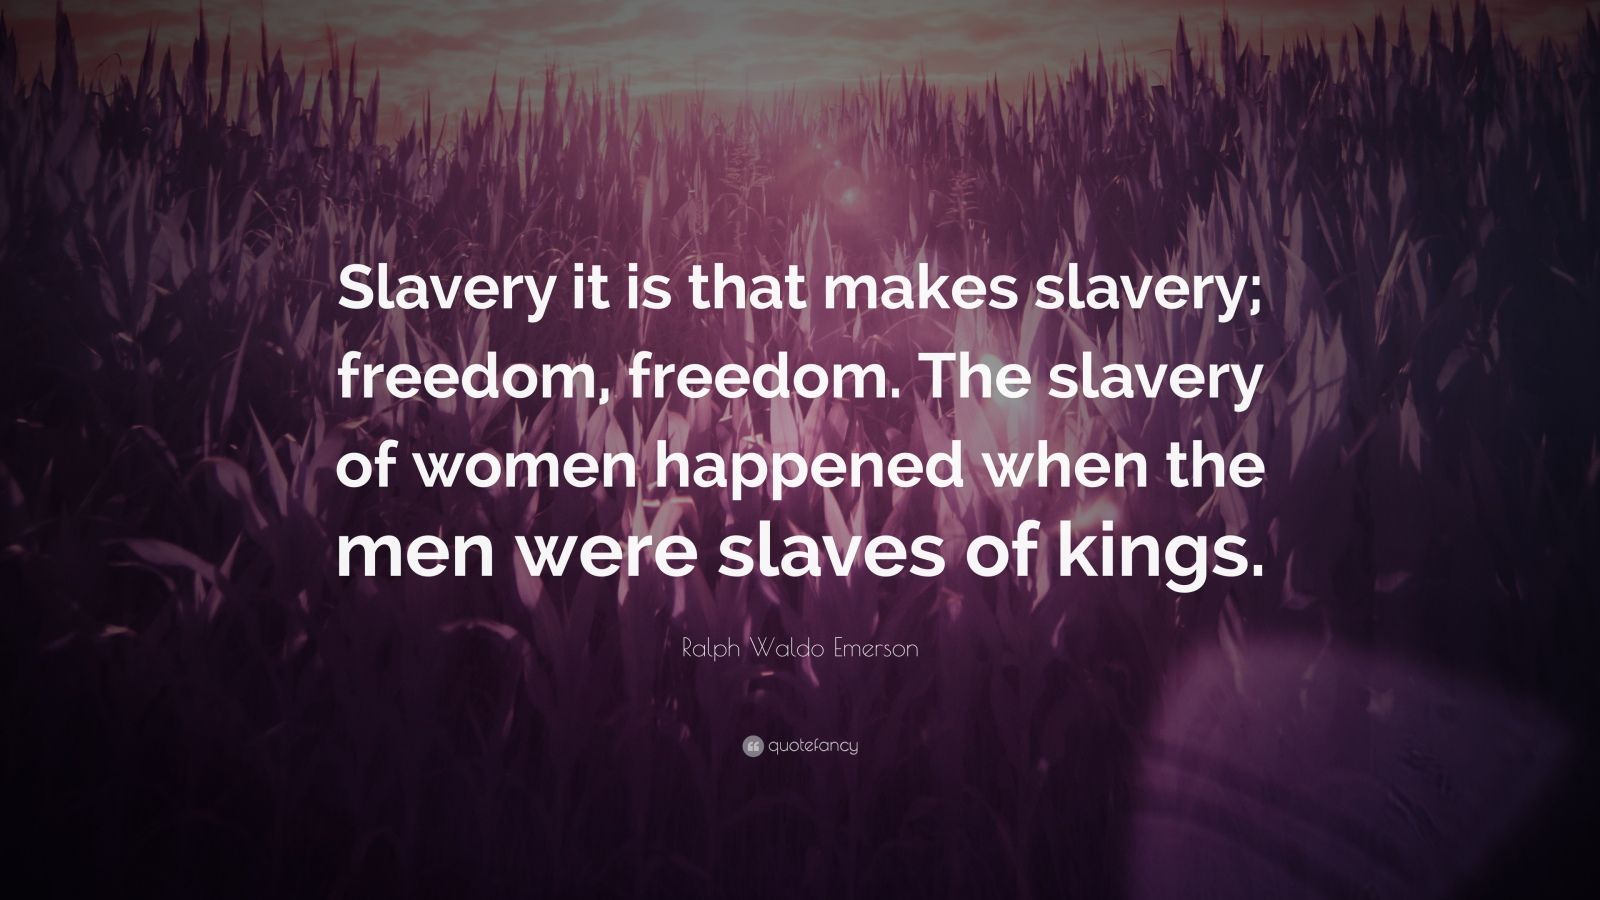 Ralph Waldo Emerson Quote “Slavery it is that makes